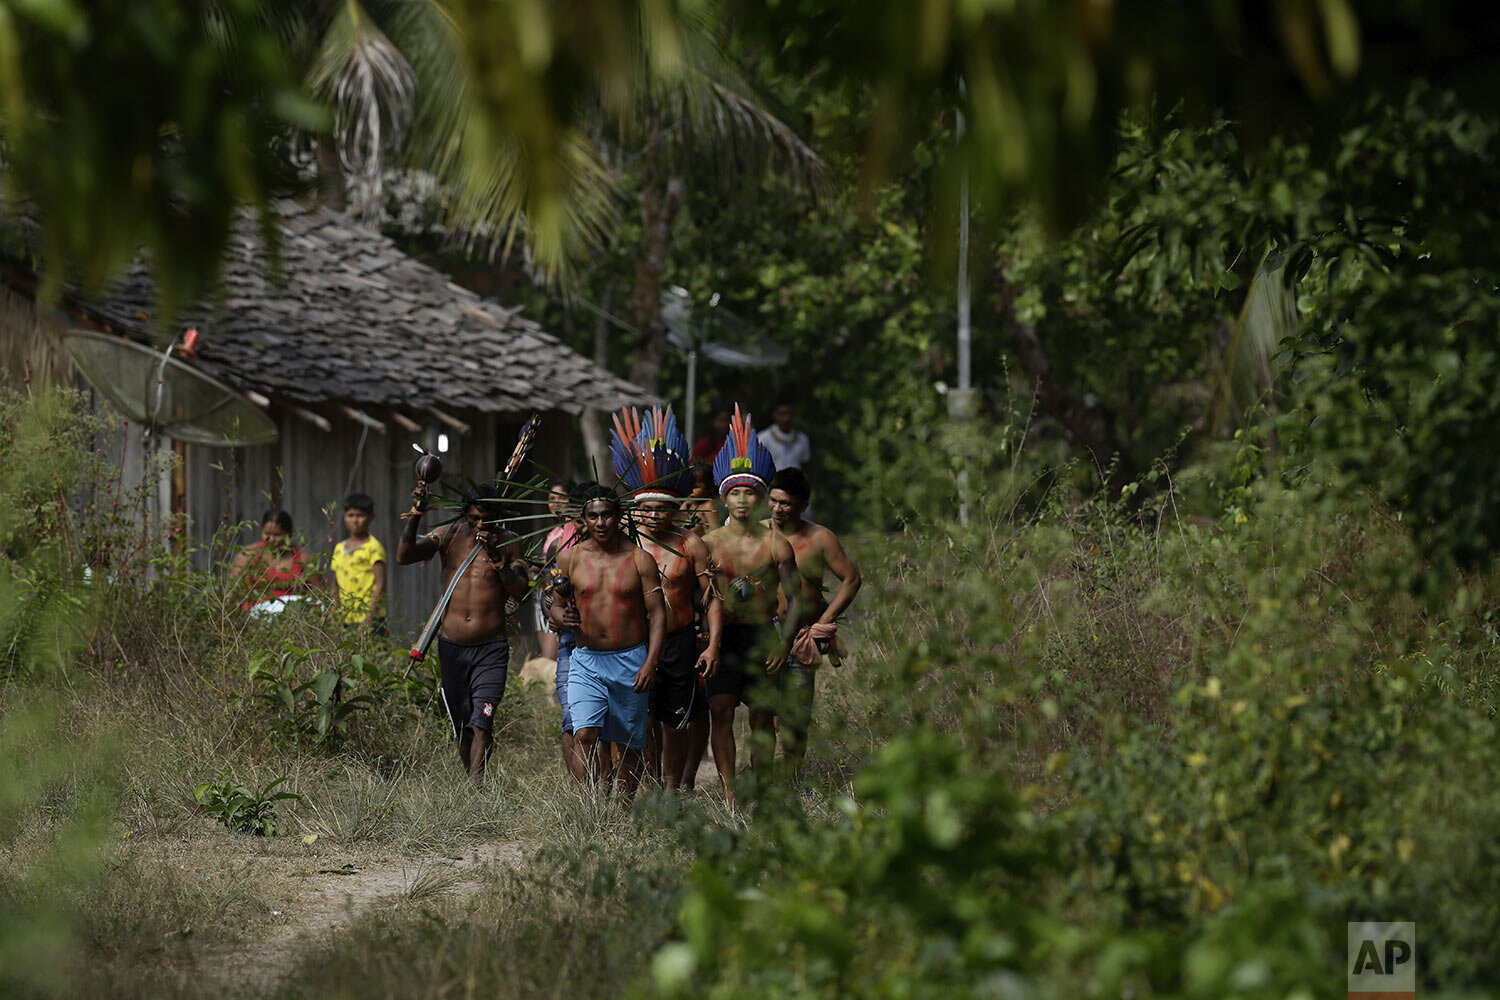  Members of the Tenetehara Indigenous arrive to take part in a festival in the Alto Rio Guama Indigenous Reserve, near Paragominas, in the northern Brazilian state of Para, Monday, Sept. 7, 2020. (AP Photo/Eraldo Peres) 